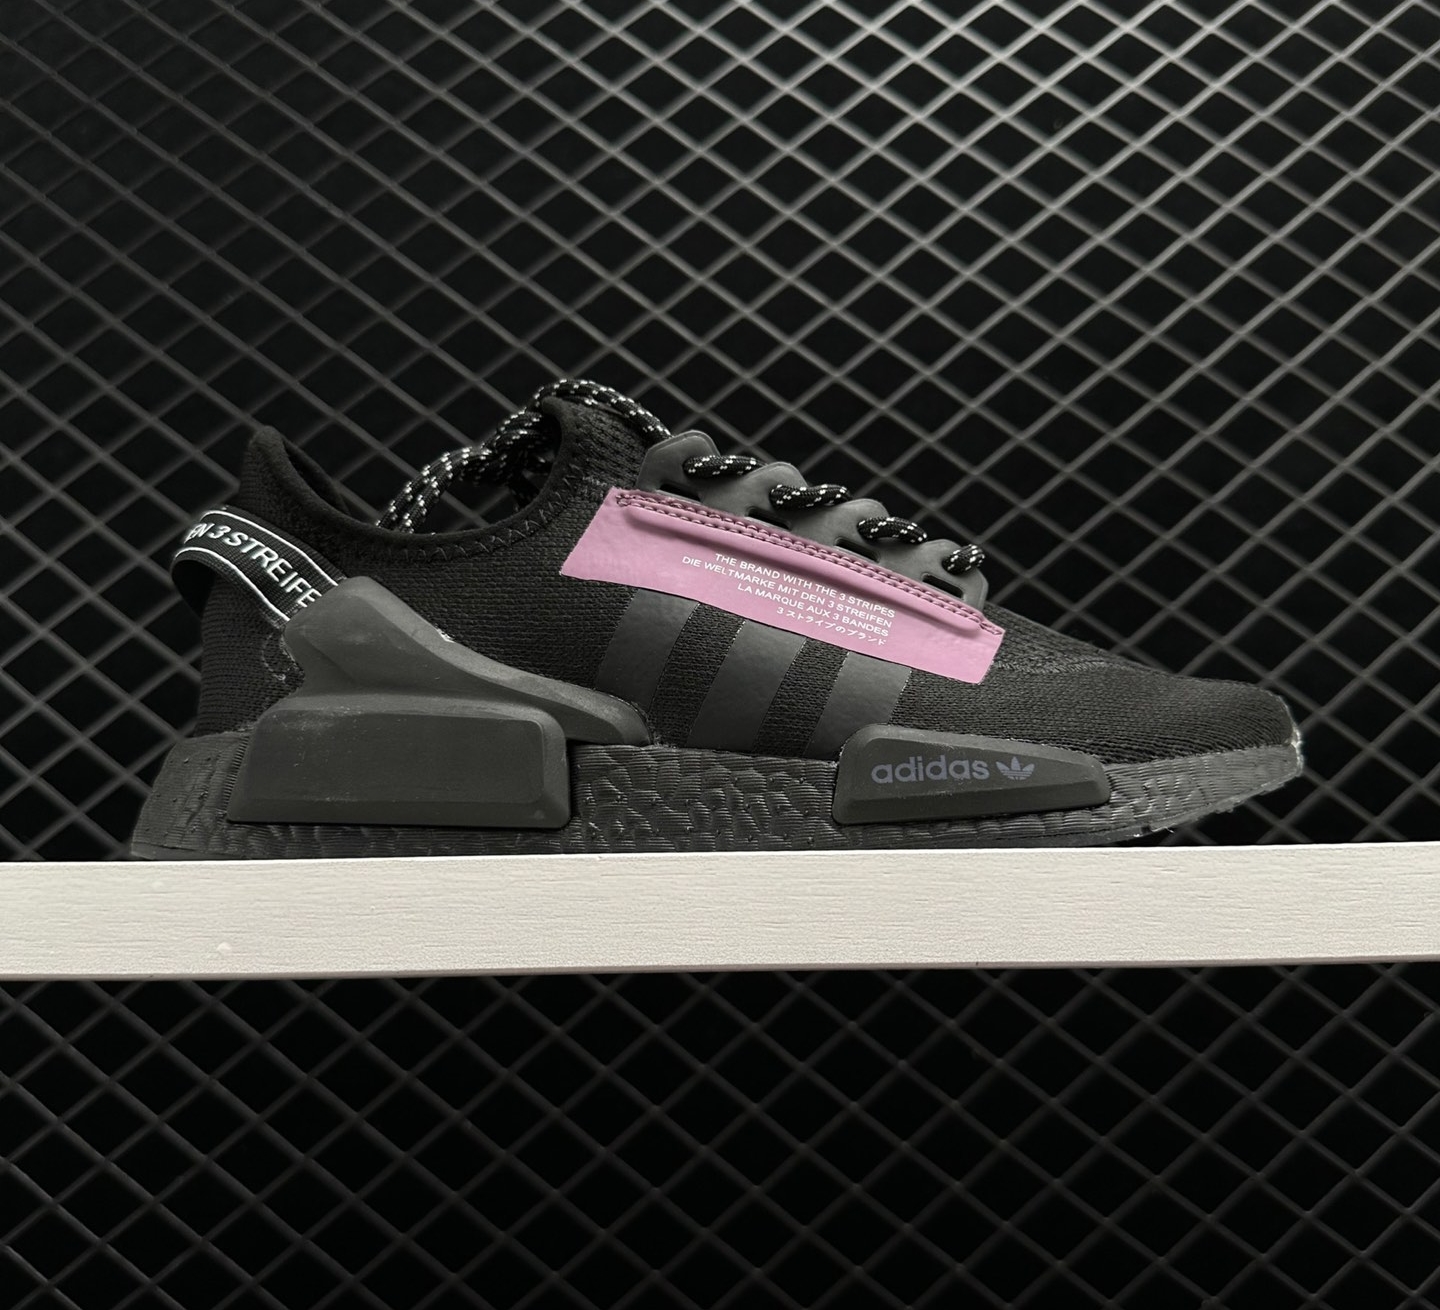 Adidas NMD R1 V2 Black Pink: Stylish and Comfortable Sneakers for Women